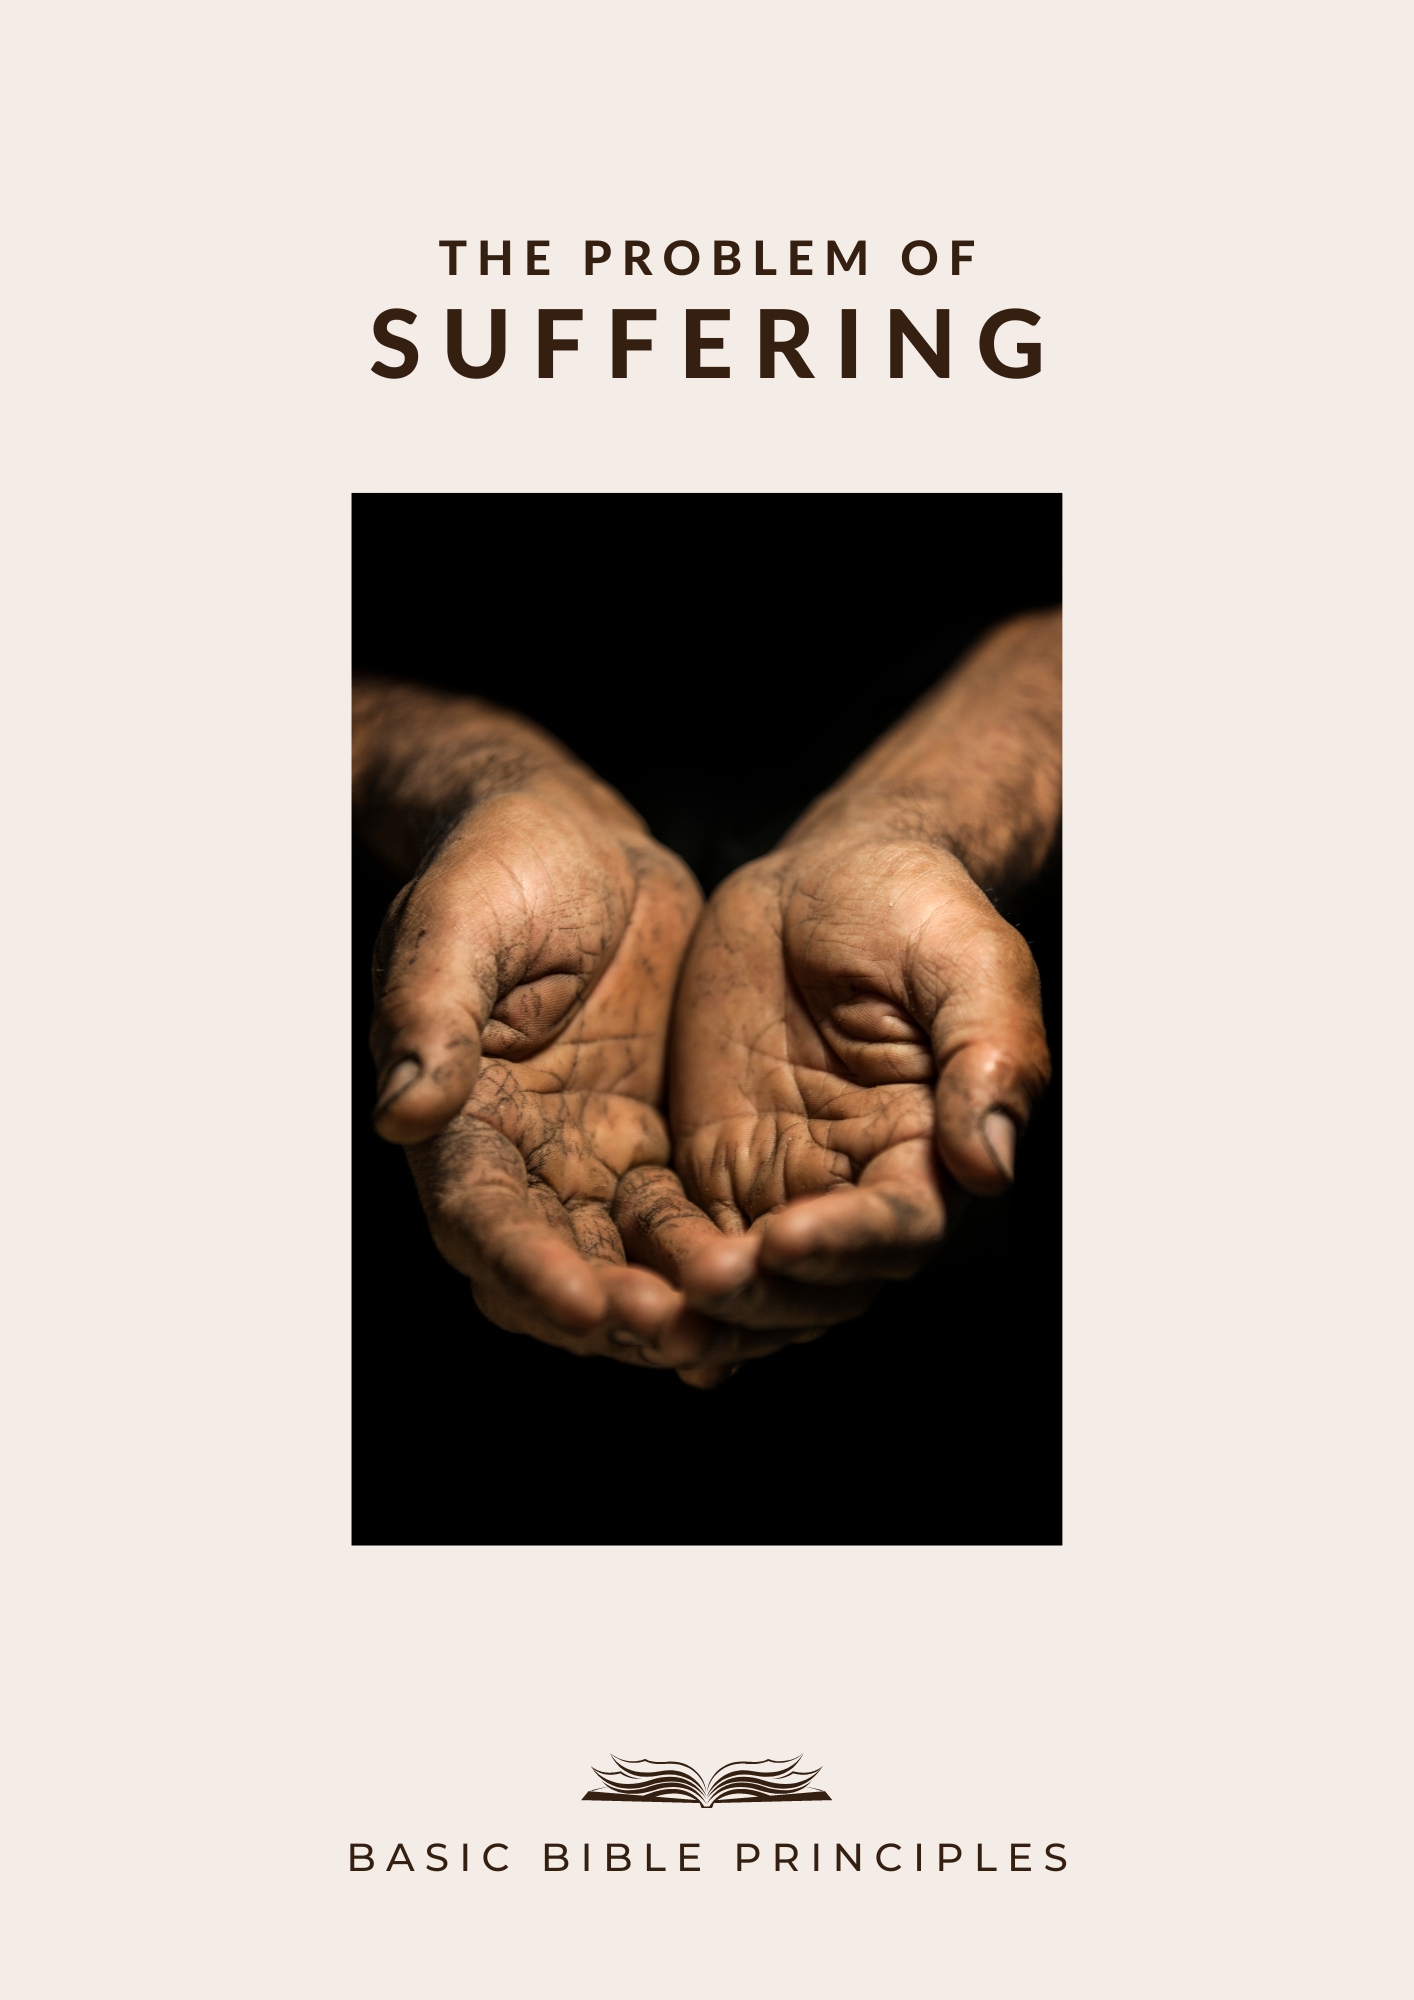 Basic Bible Principles: THE PROBLEM OF SUFFERING